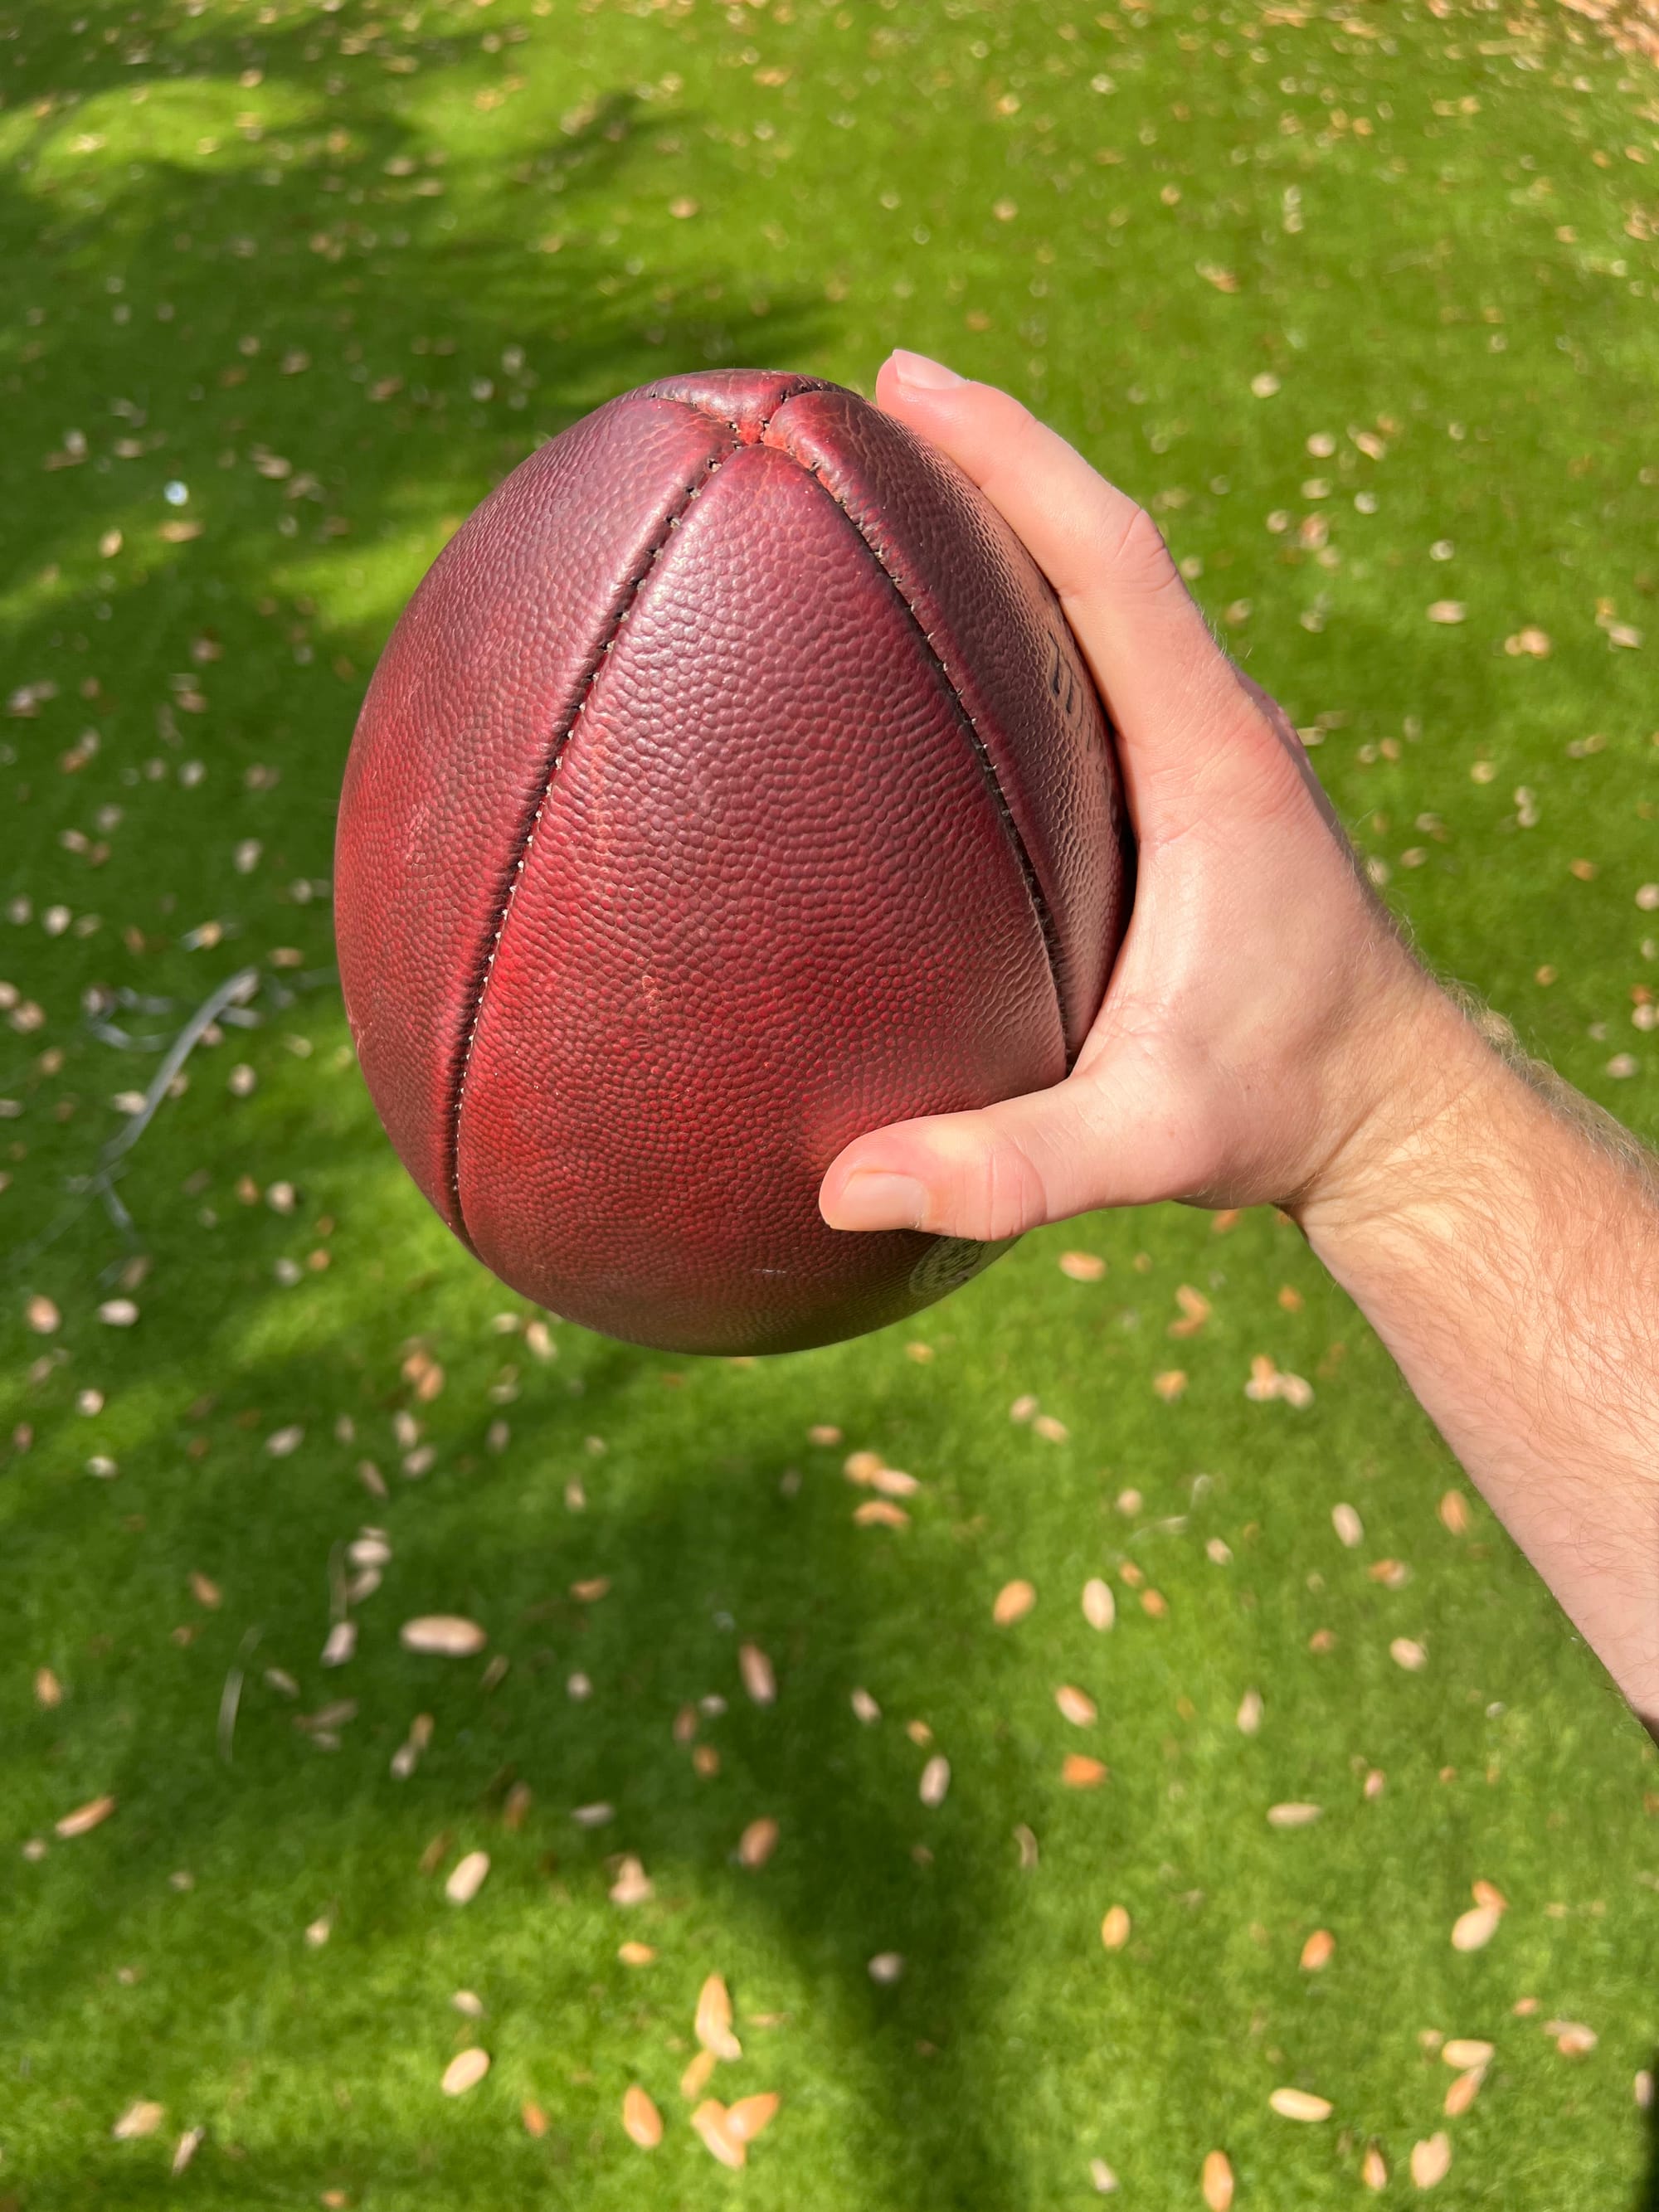 How to Grip a Football